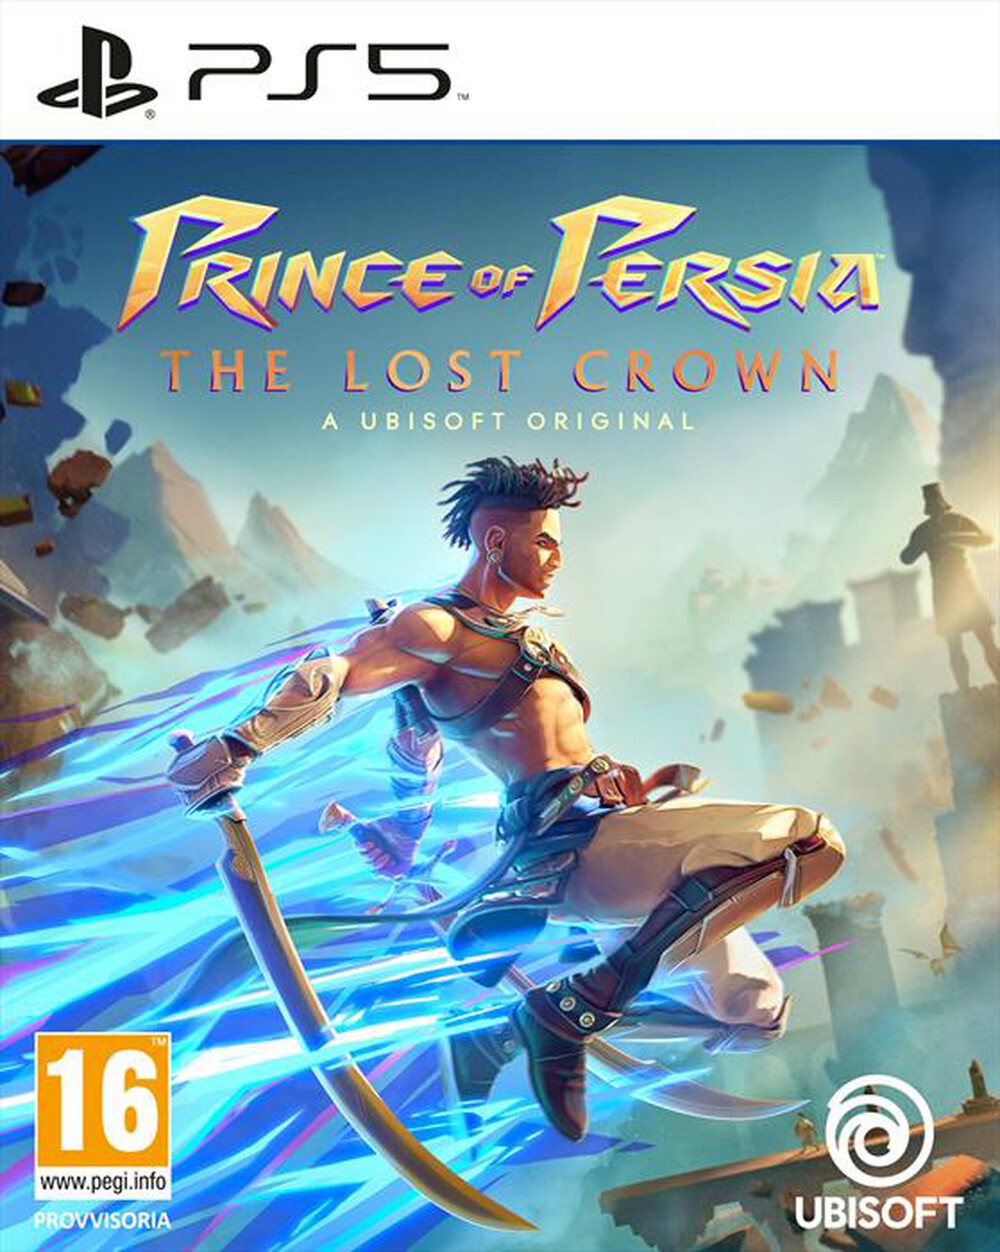 "UBISOFT - PRINCE OF PERSIA: THE LOST CROWN PS5"